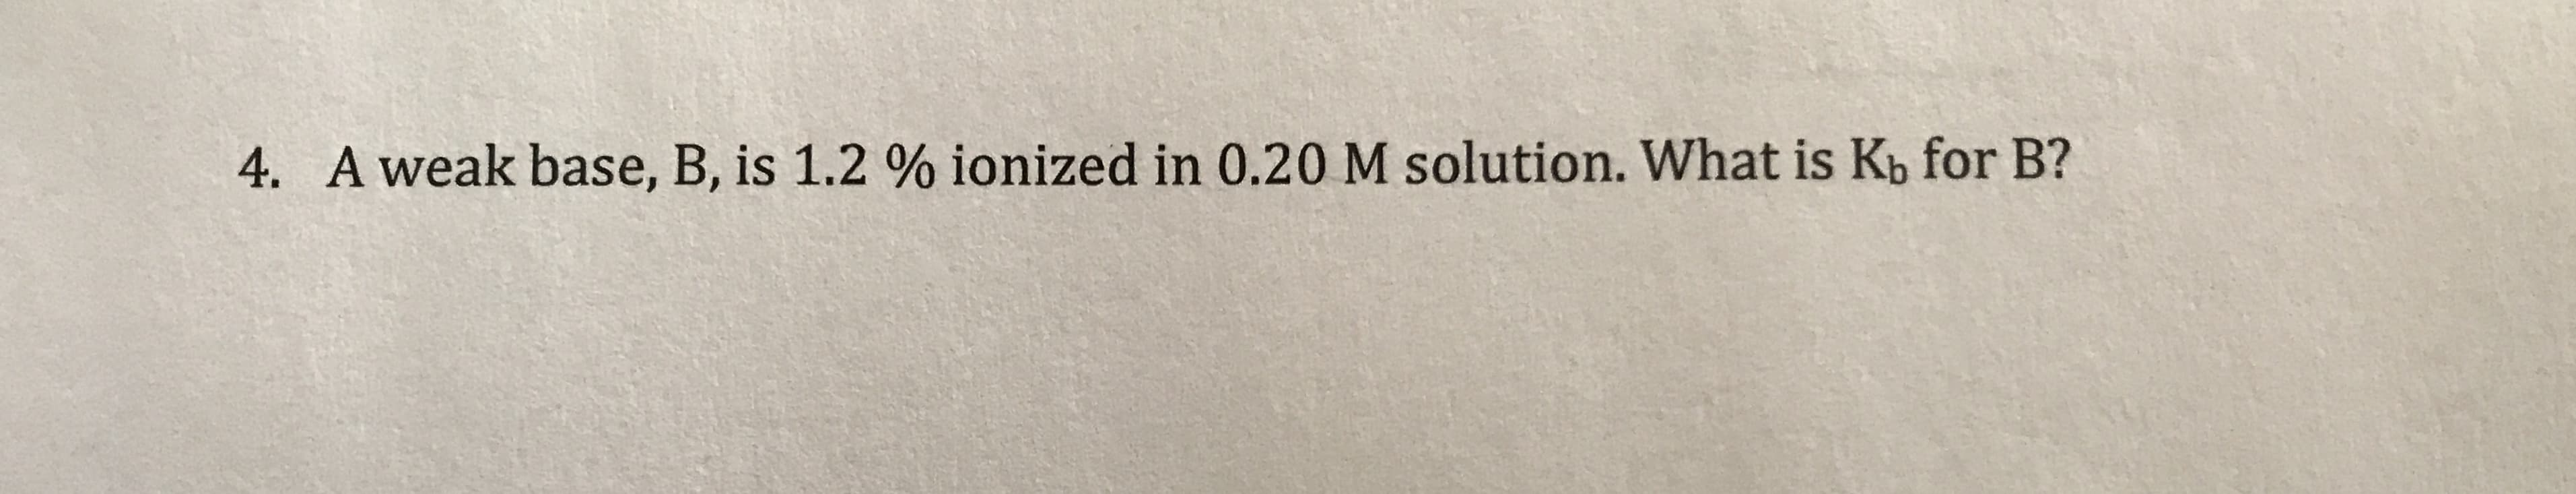 4. A weak base, B, is 1.2 % ionized in 0.20 M solution. What is Kb for B?
